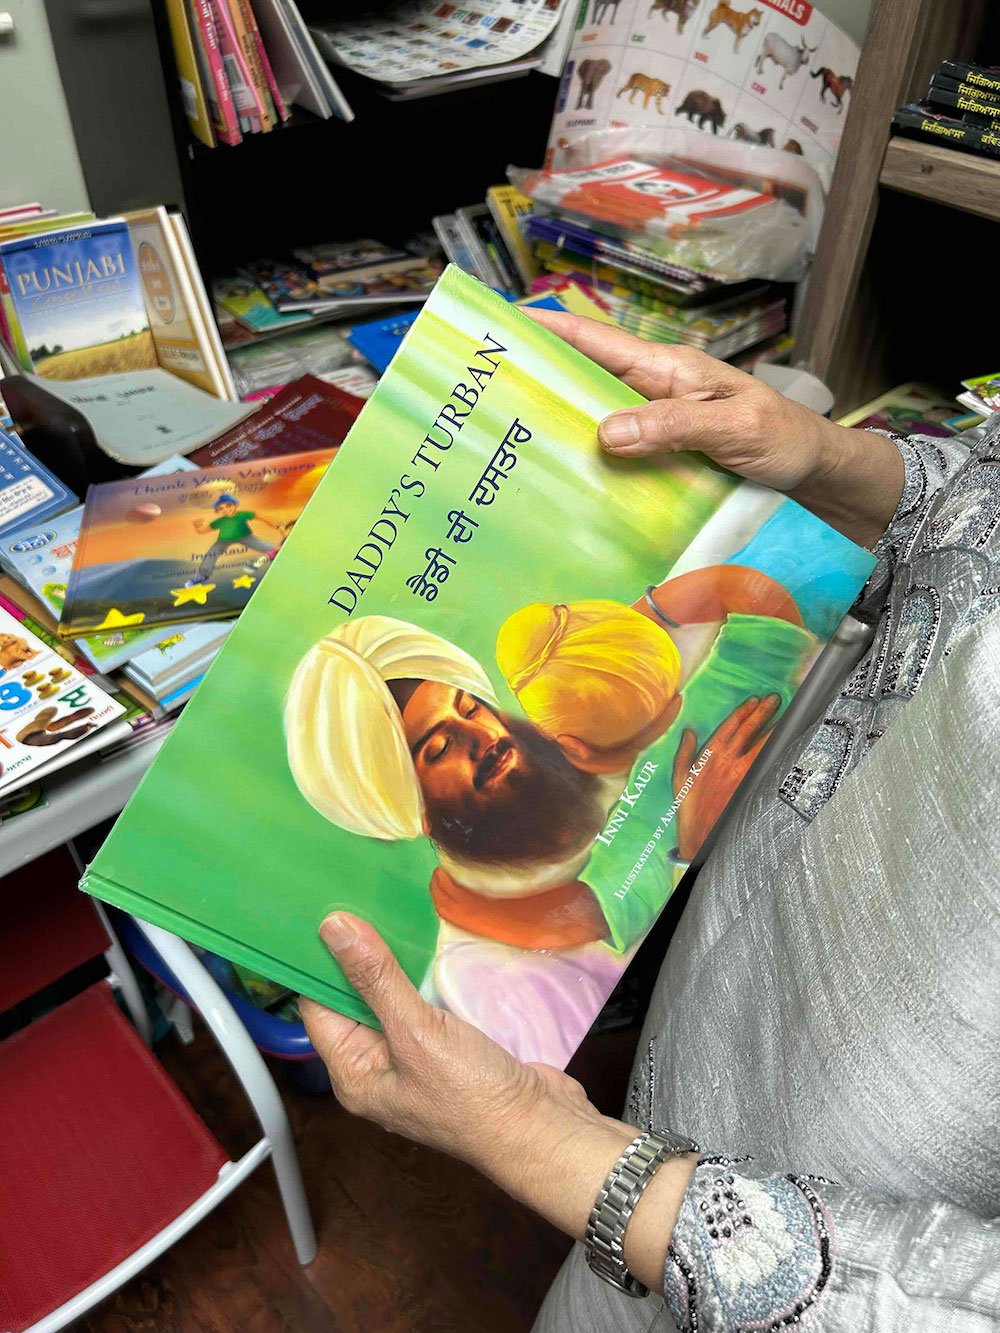 A person wearing a silver suit holds a bright green children’s book titled 'Daddy’s Turban,' featuring an illustration of a Sikh man wearing a yellow turban embracing a child. In the background is the interior of a bookstore full of books.